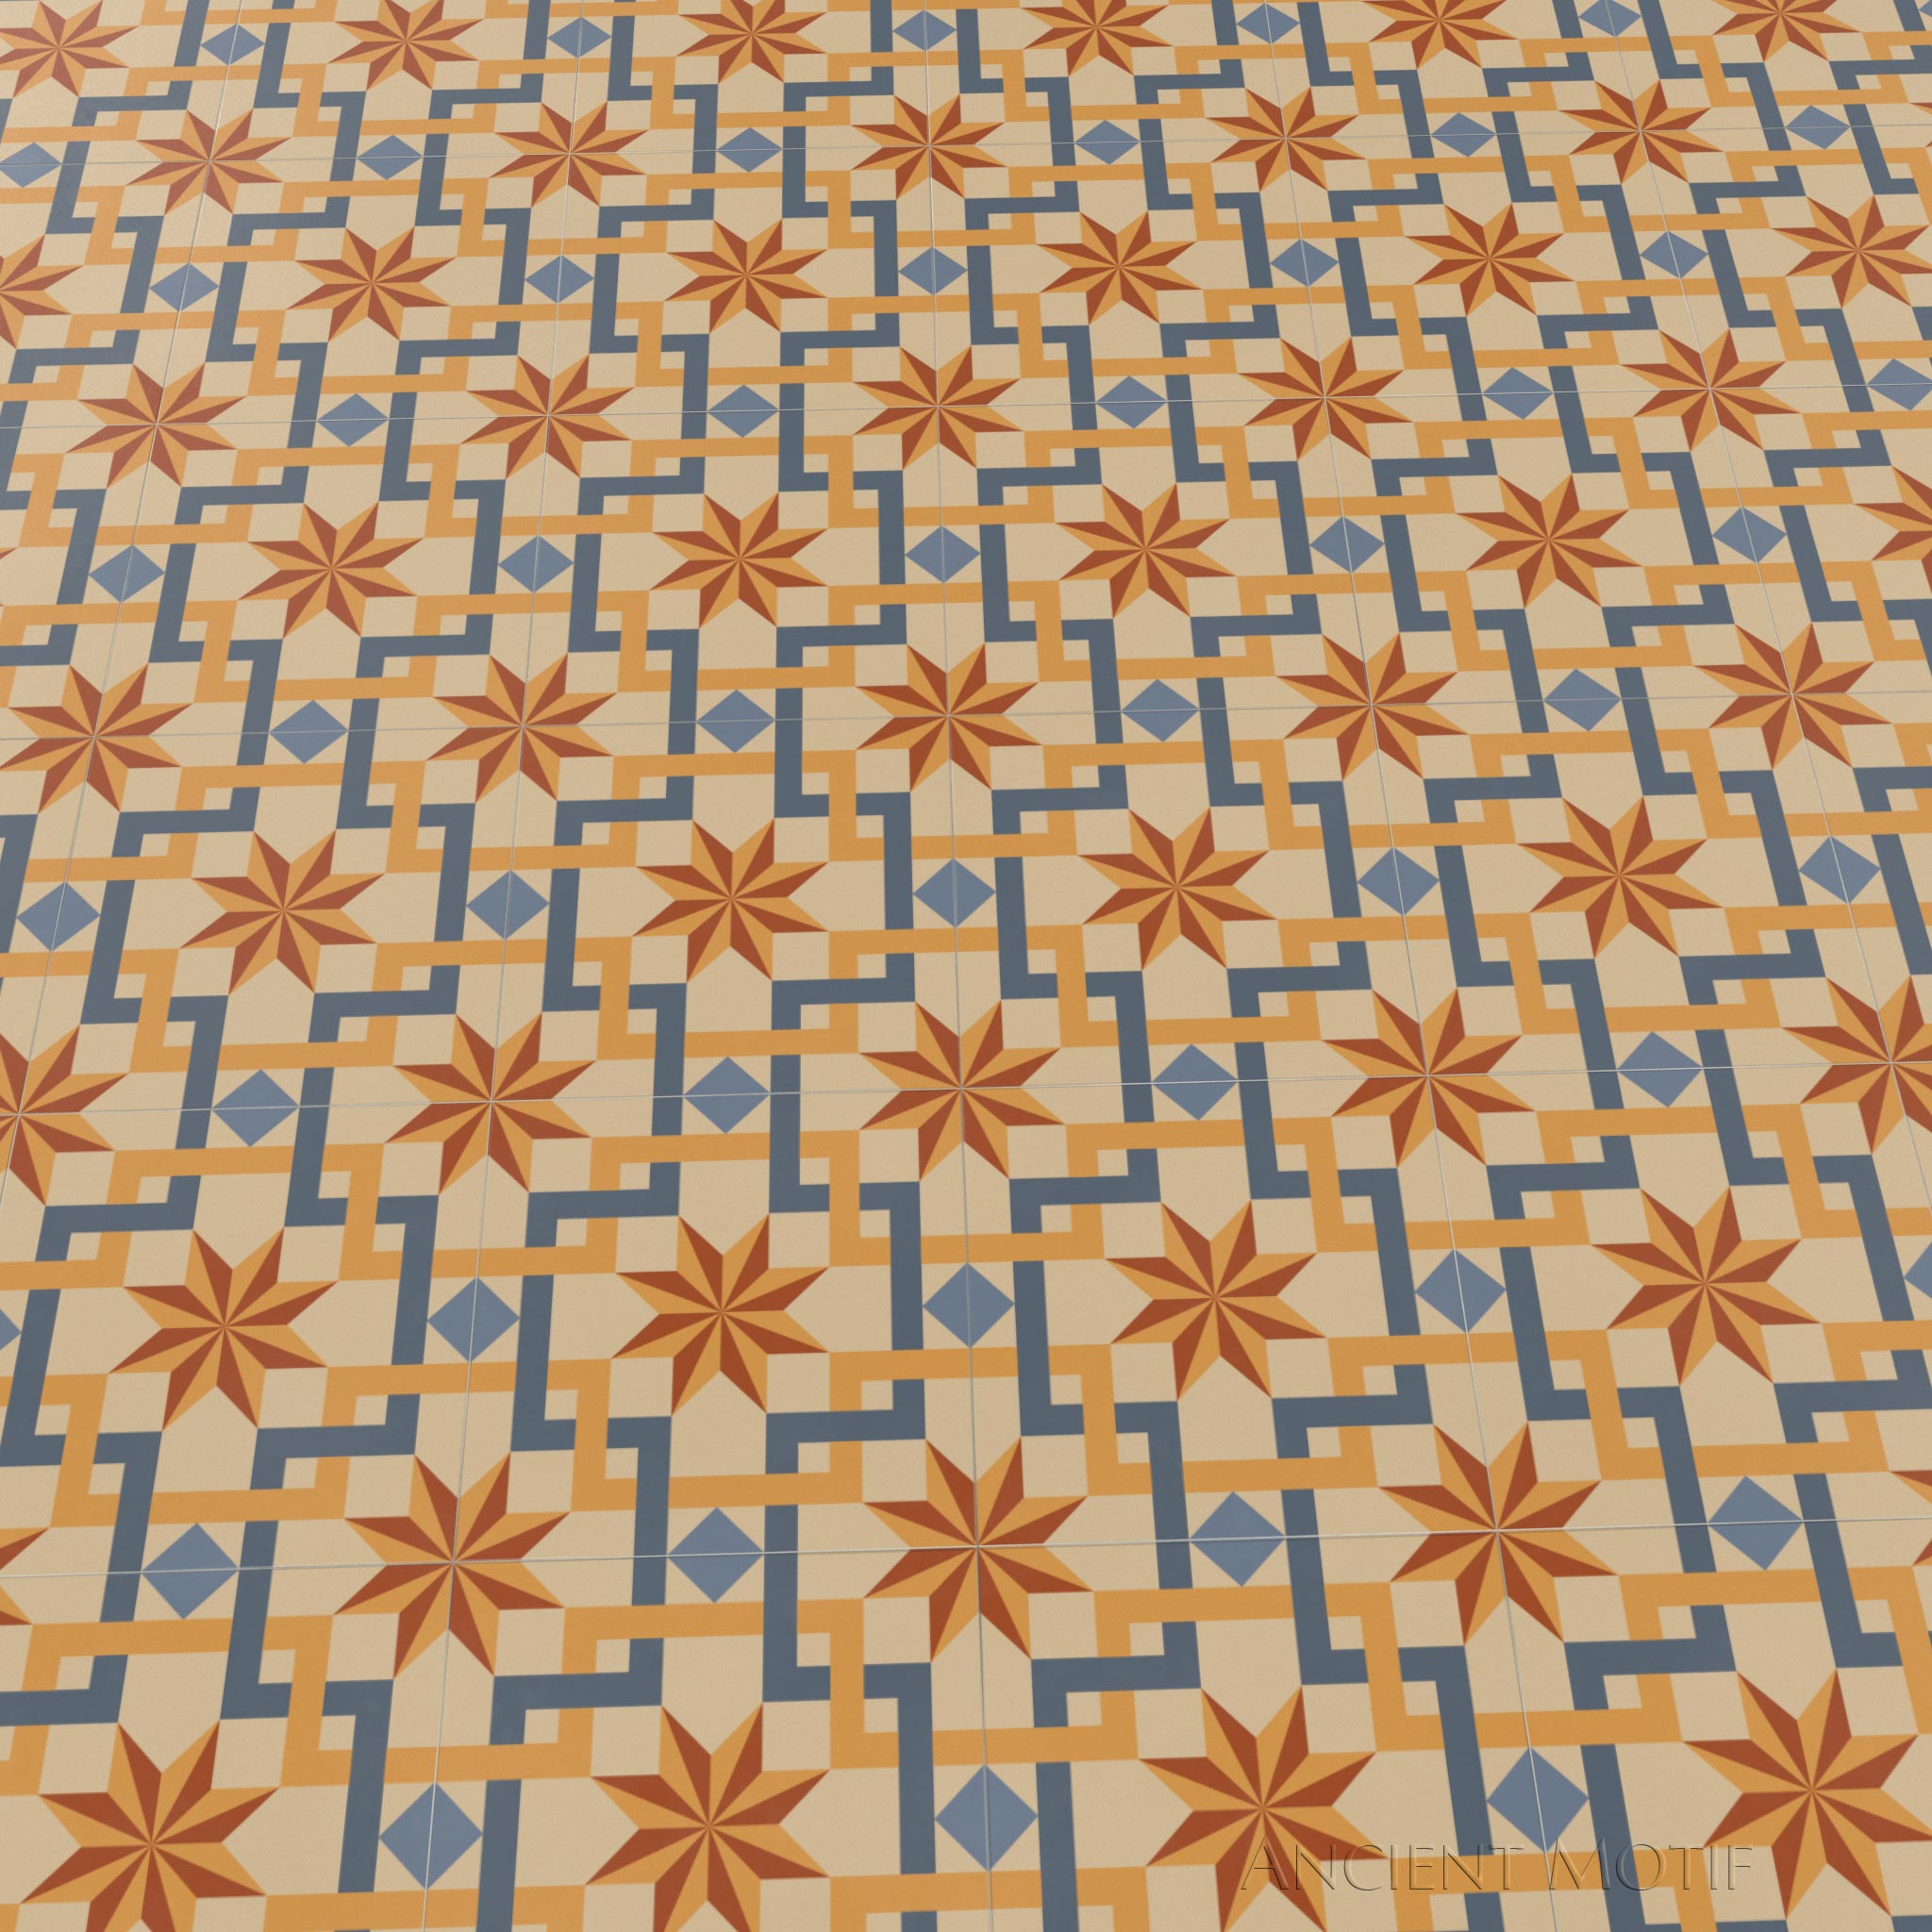 Andalusia Encaustic Cement Tile Floor in Cornflower, Ginger and Apricot